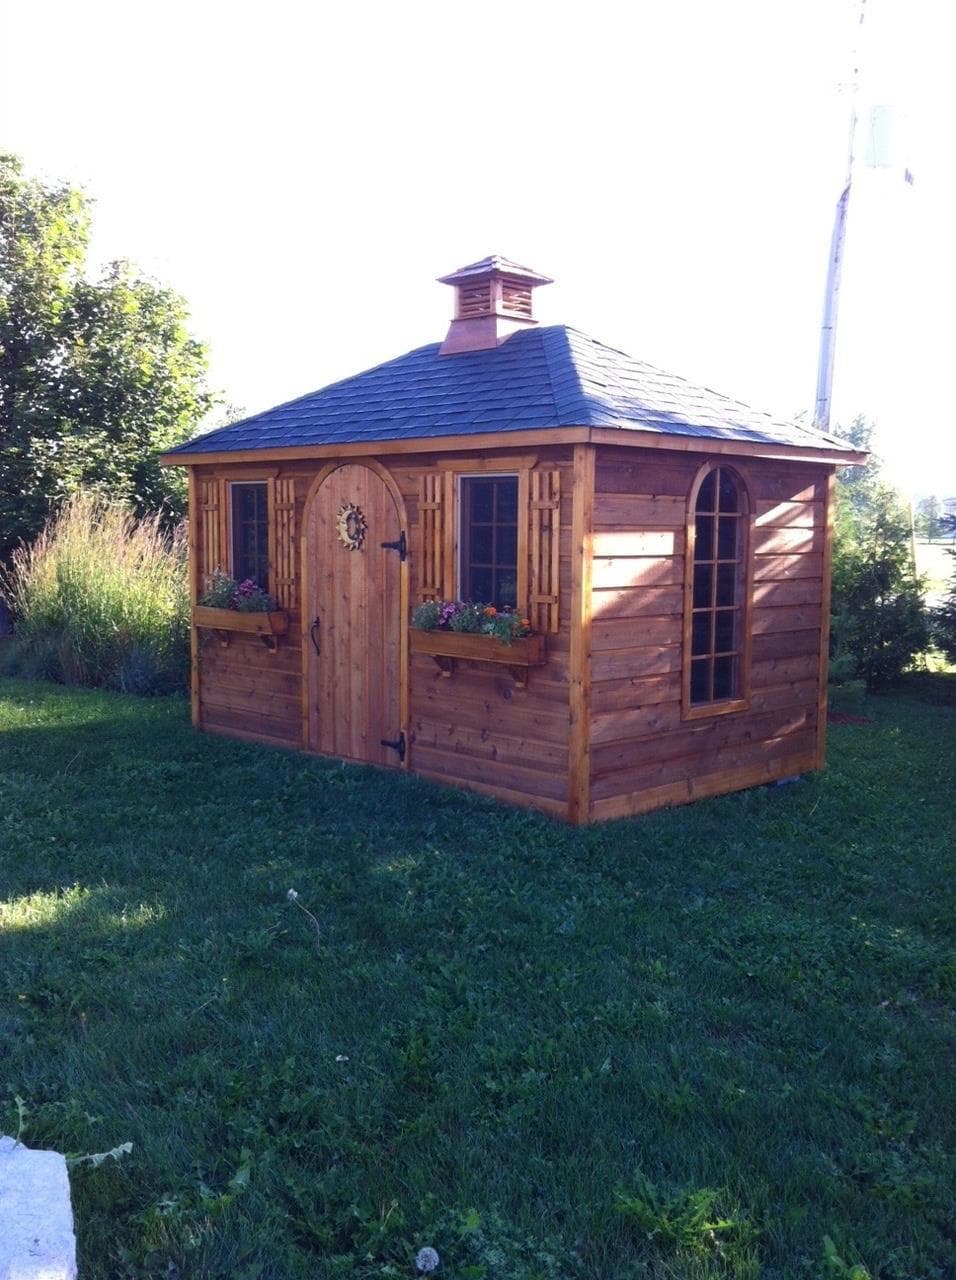 Cedar Sonoma 8 X12 cabin with antique flower boxes in Brooklin Ontario. ID number 223823-4